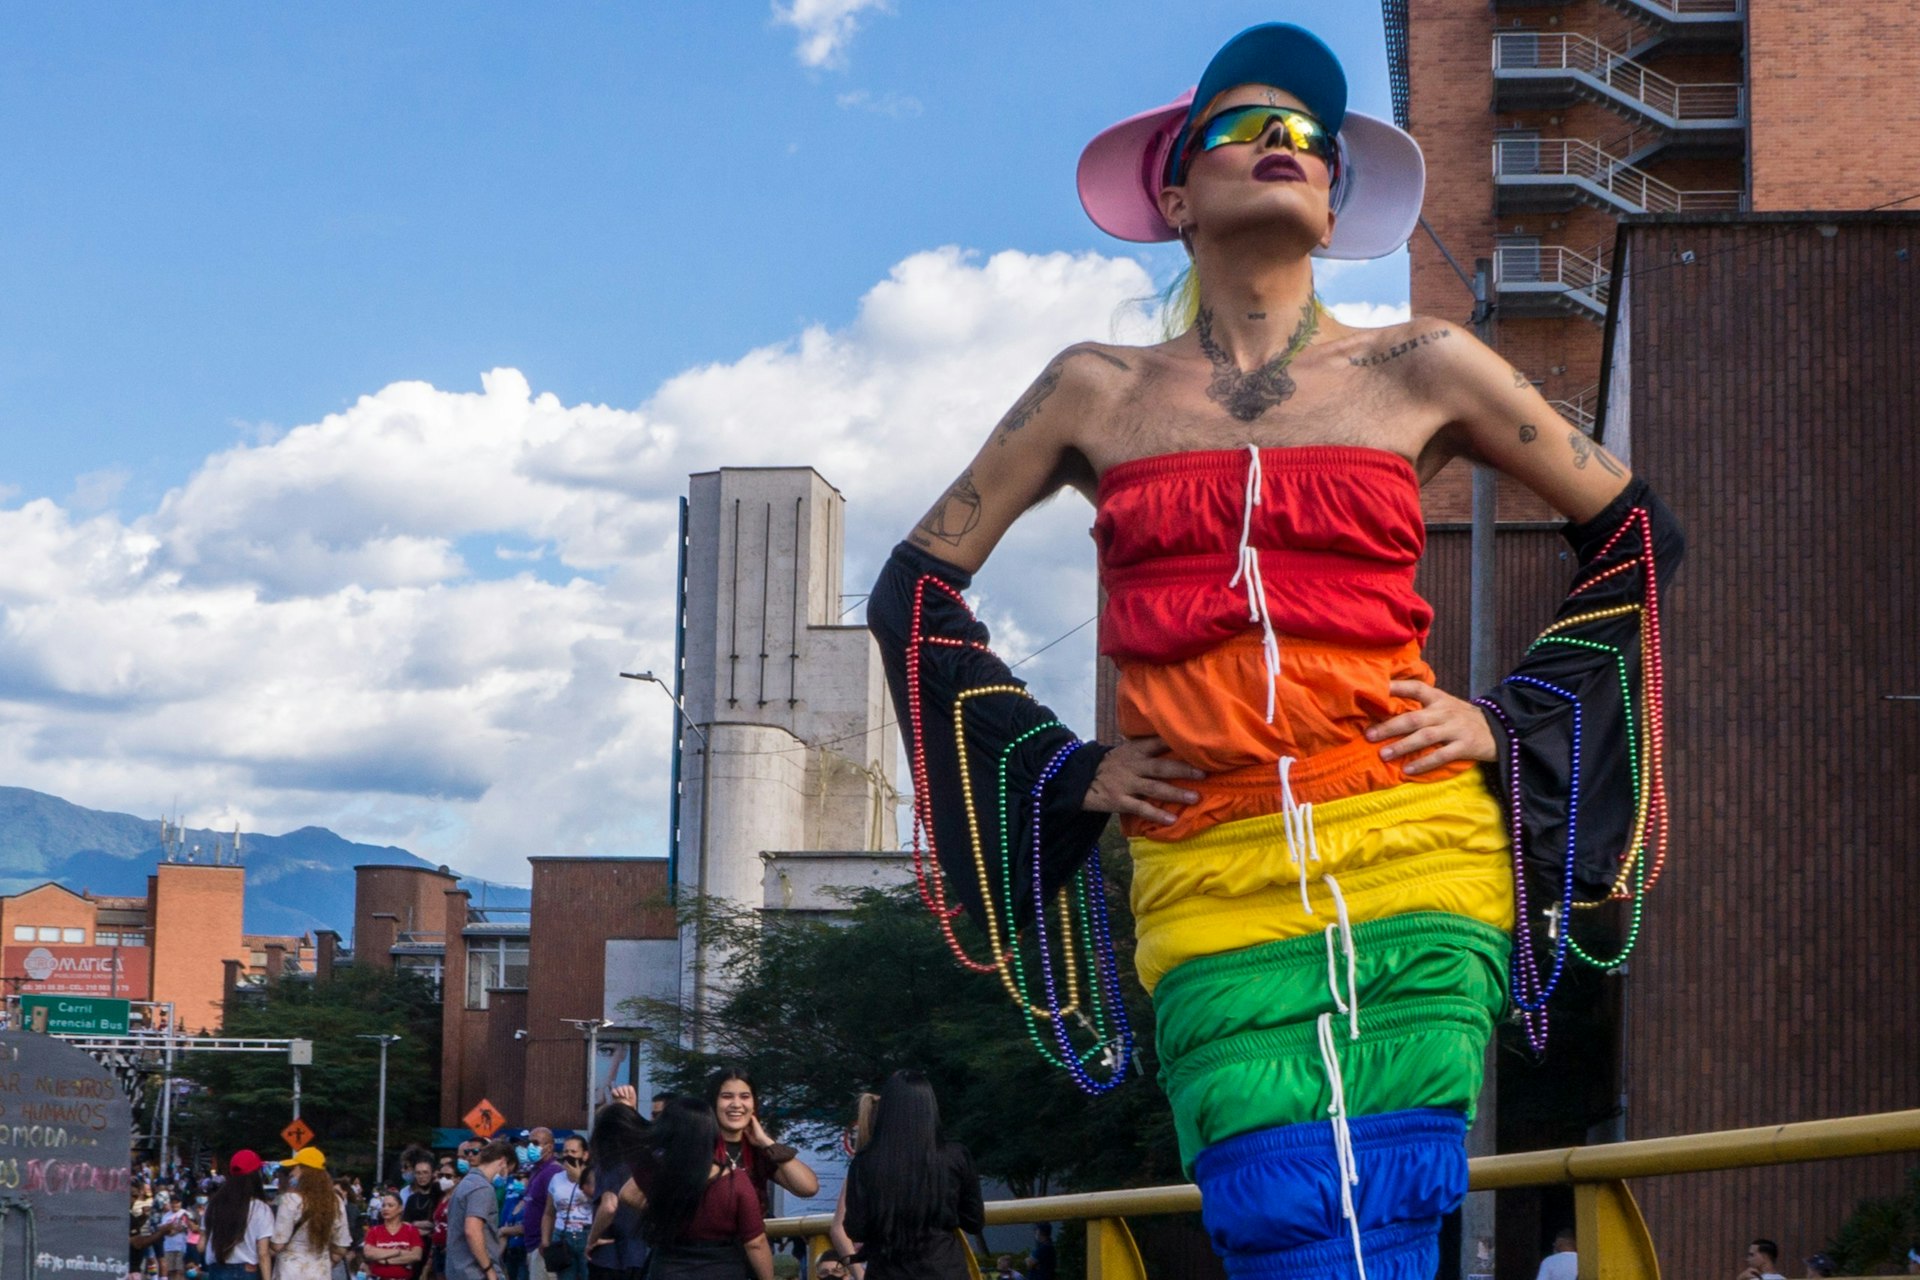 A drag queen dressed in a colorful rainbow-patterned dress draped with beads strikes a pose at an outdoor Pride event 